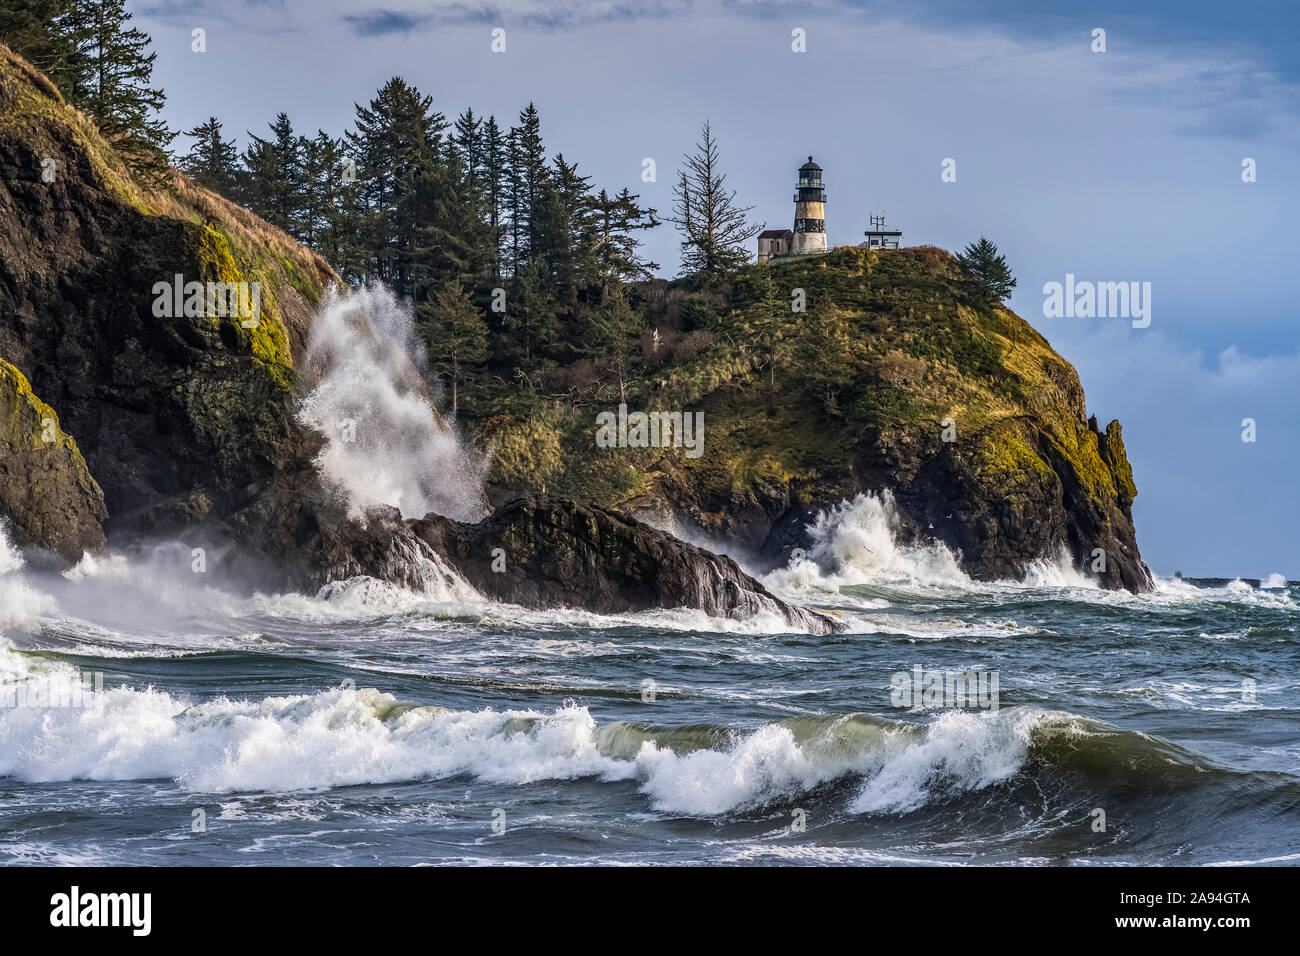 The Cape Disappointment Lighthouse guards the mouth of the Columbia River on the Washington Coast; Ilwaco, Washington, United States of America Stock Photo